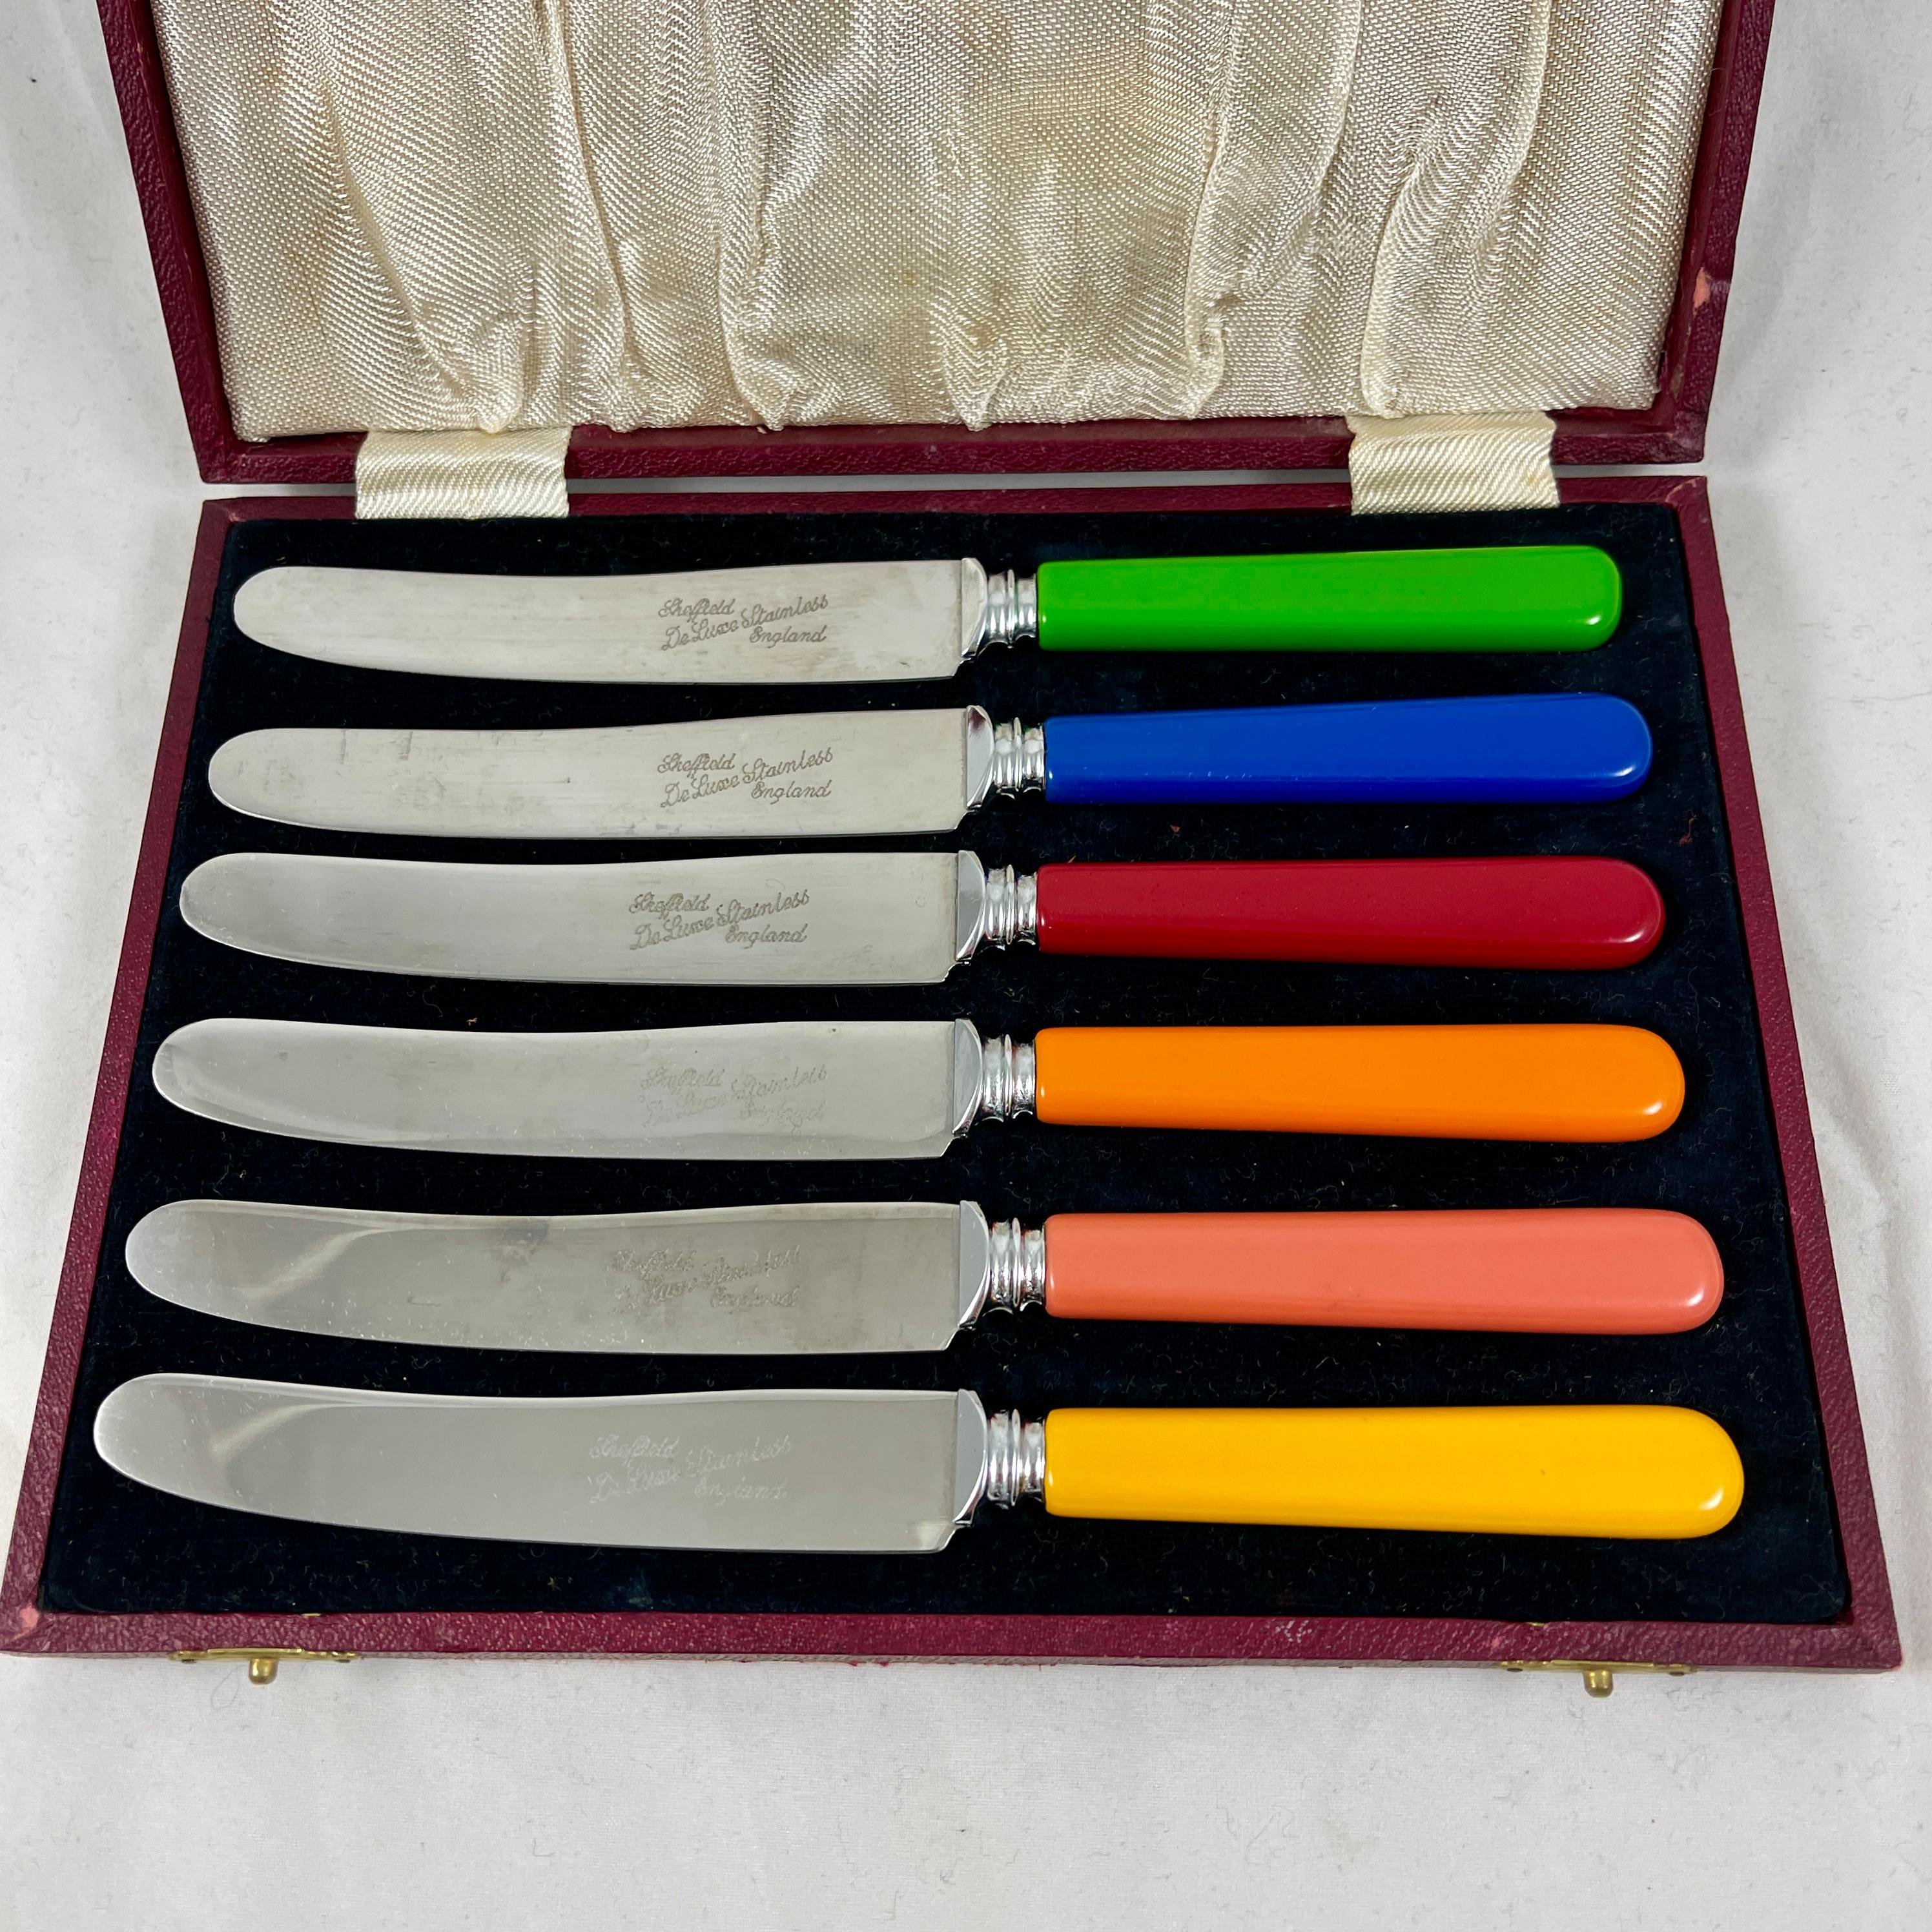 Mid-20th Century English Sheffield DeLuxe Bakelite Rainbow Colored and Stainless Spreaders S/6